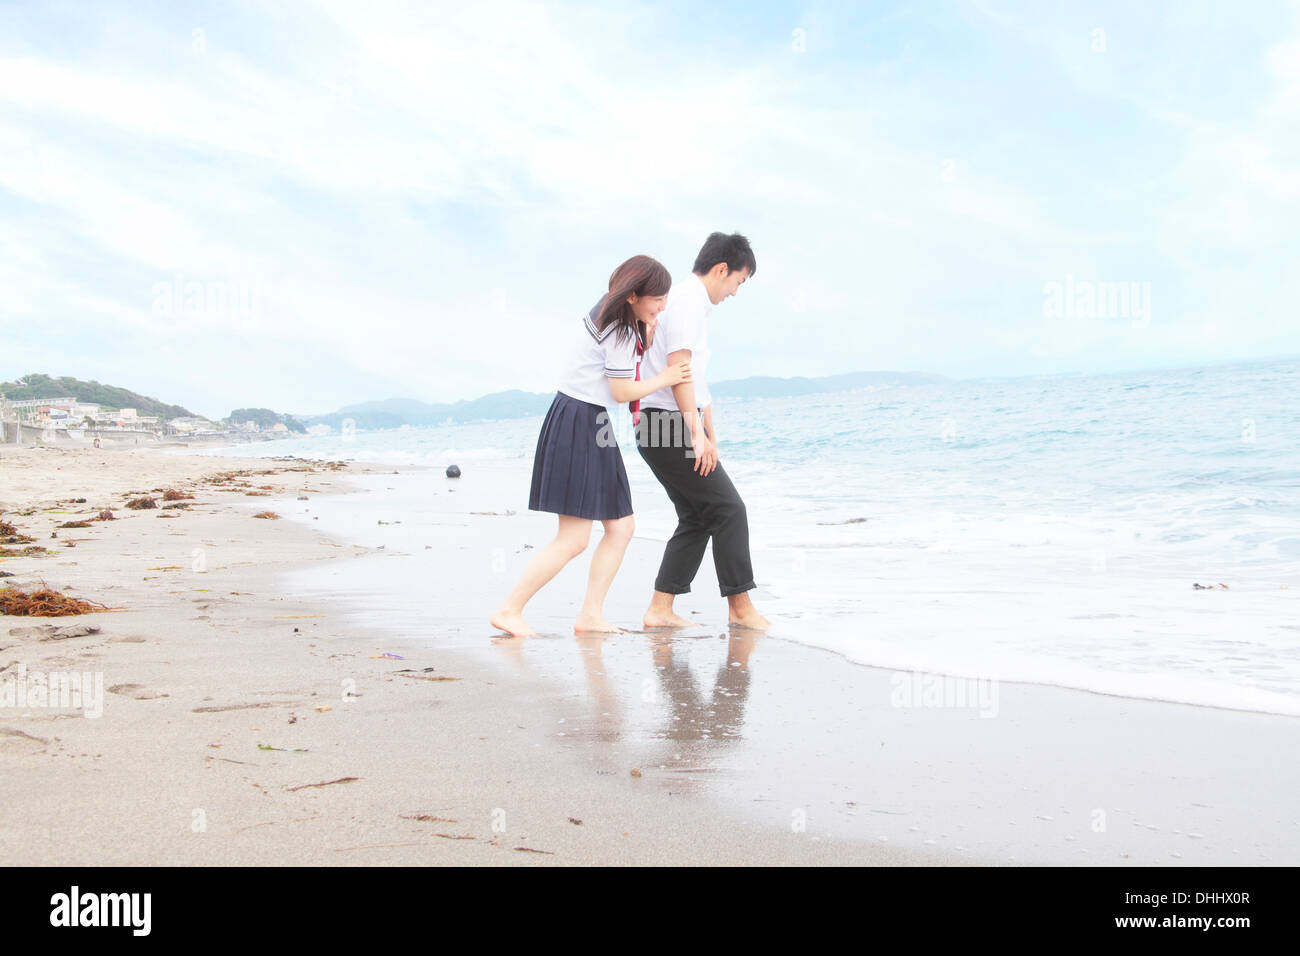 Young couple fooling around on beach Stock Photo